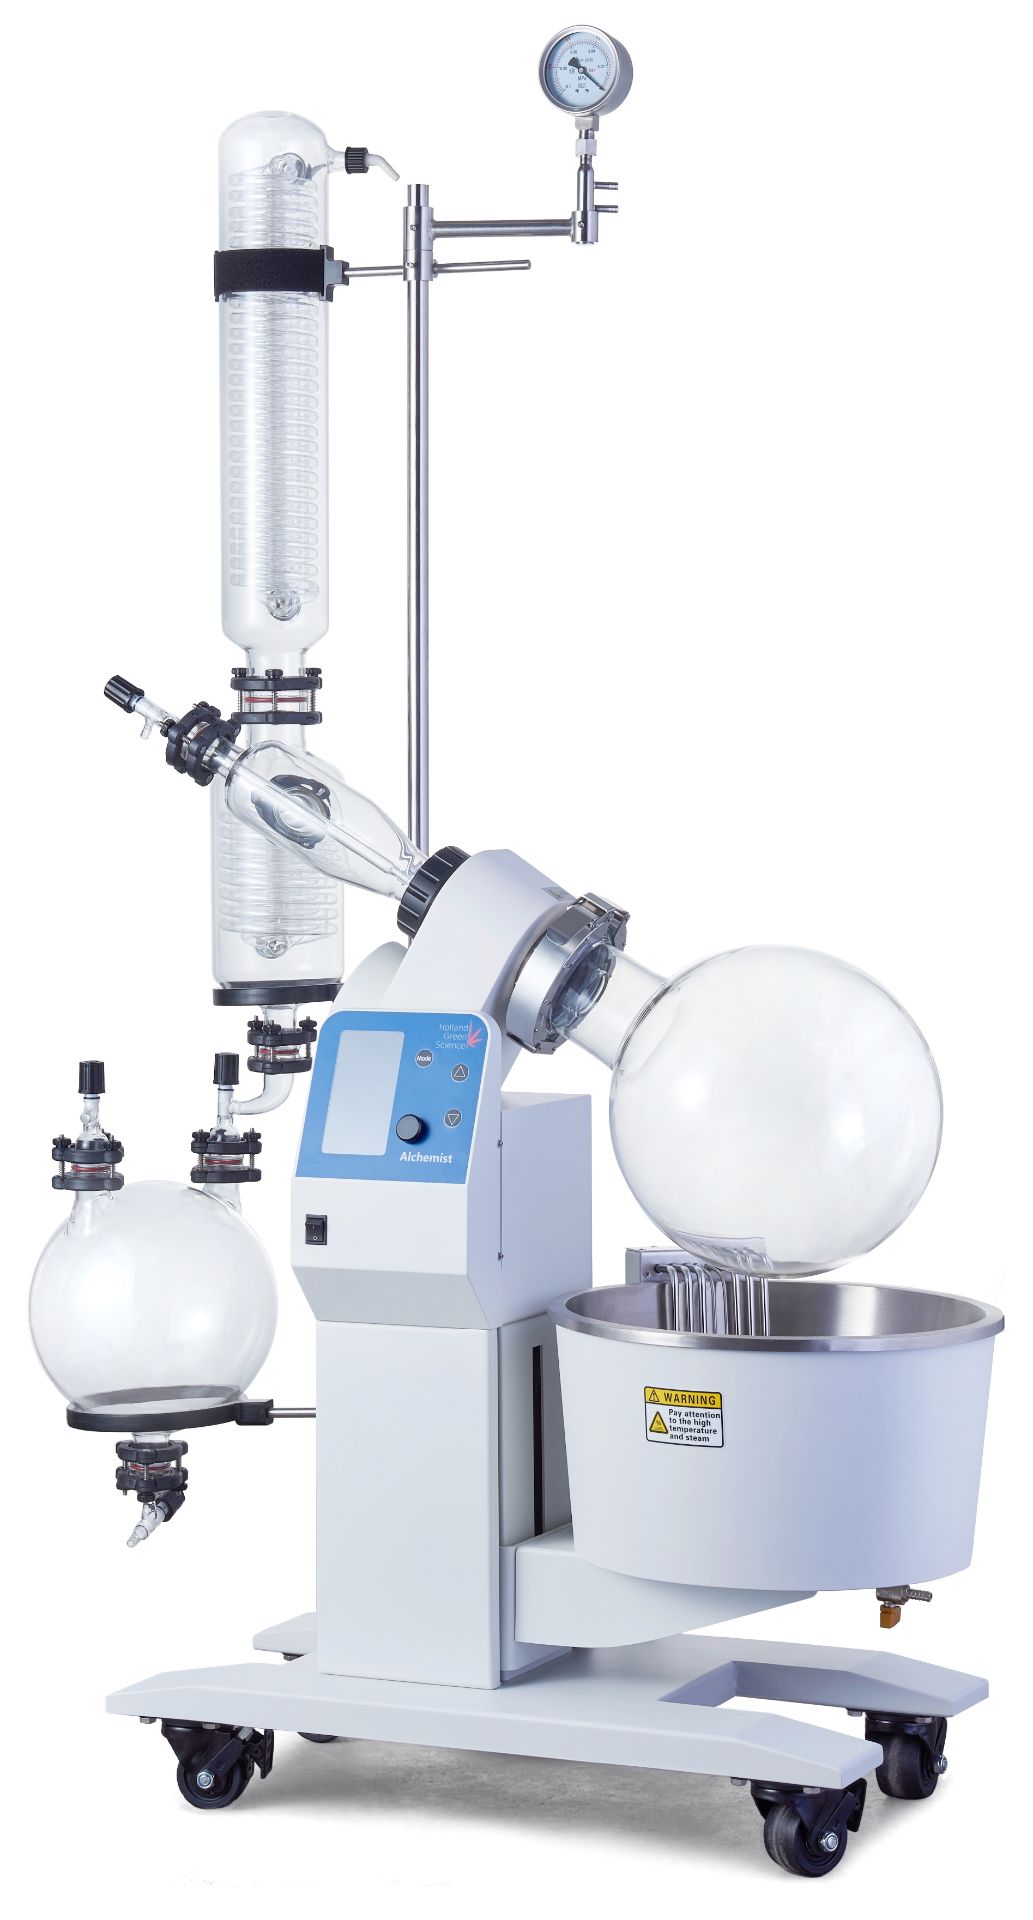 Lot of (2) New/ Original Packaging Holland Green Science 20L Rotary Evaporator Model Alchemist - Image 2 of 2